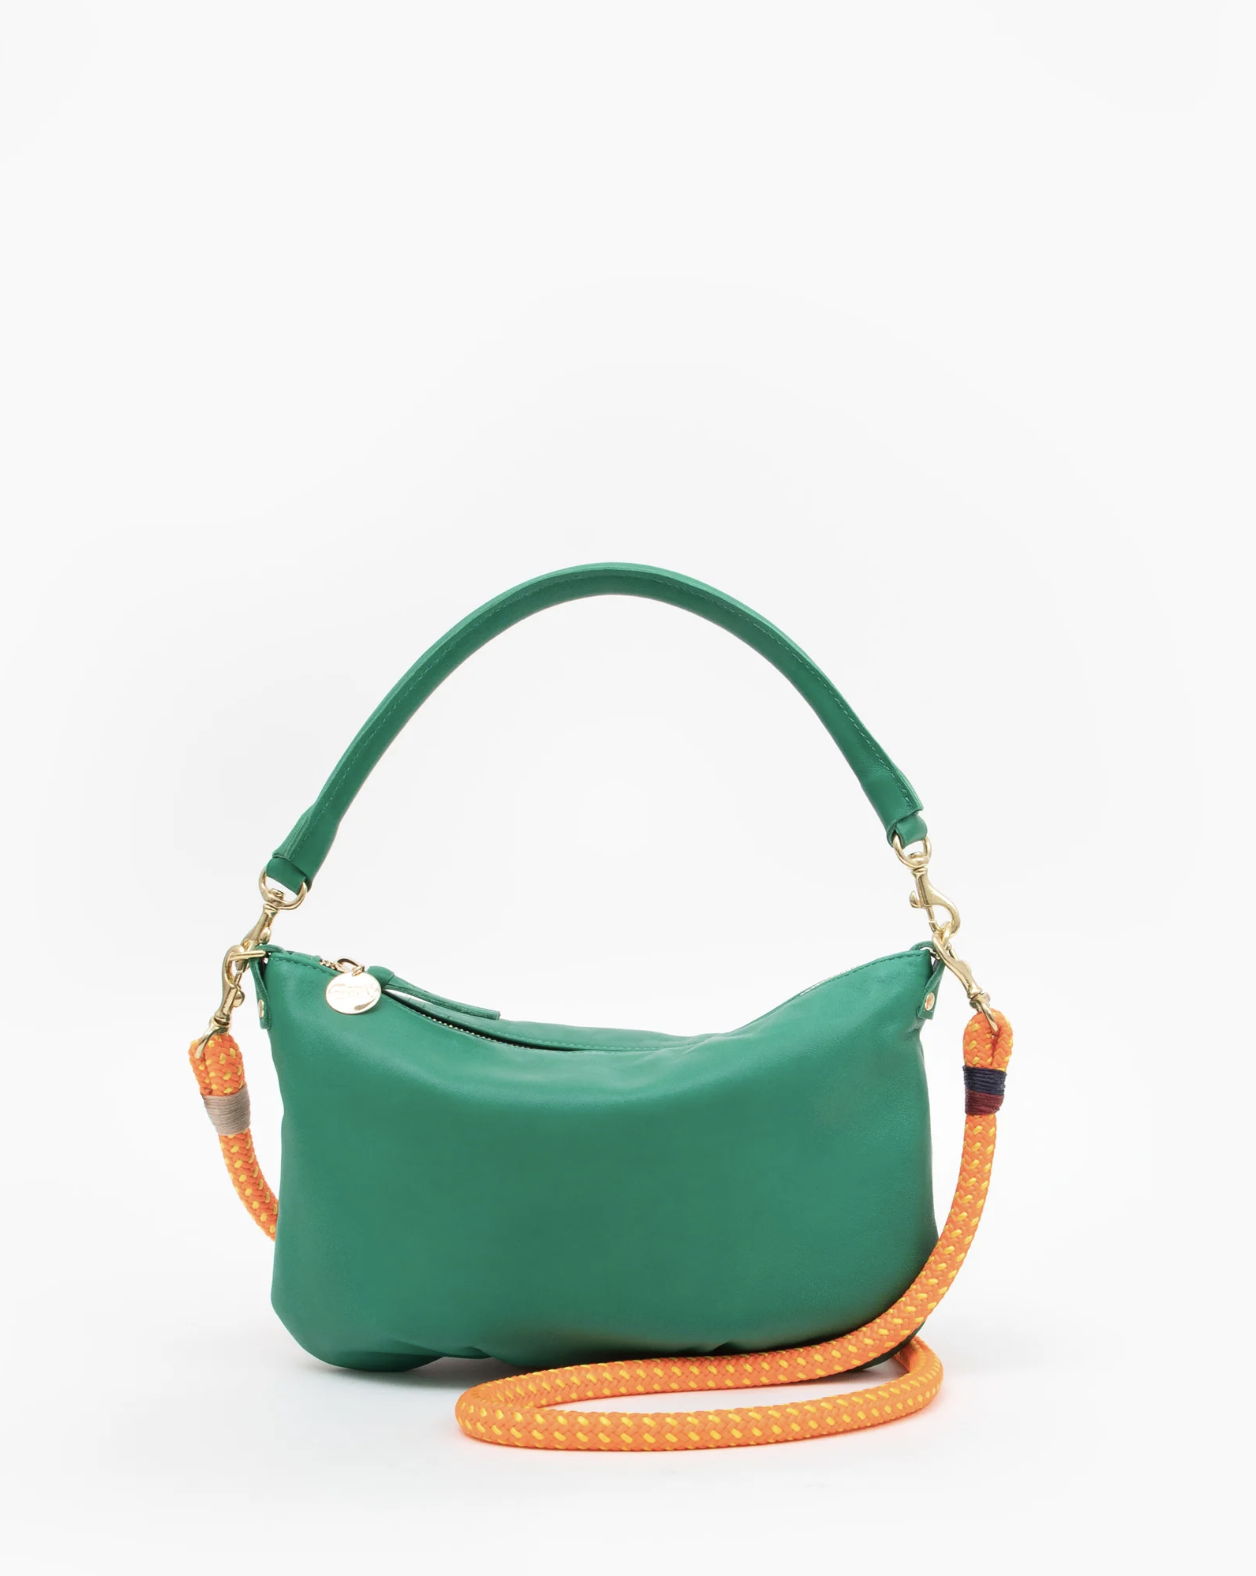 Clare V. Sailcord Crossbody Strap  Anthropologie Japan - Women's Clothing,  Accessories & Home